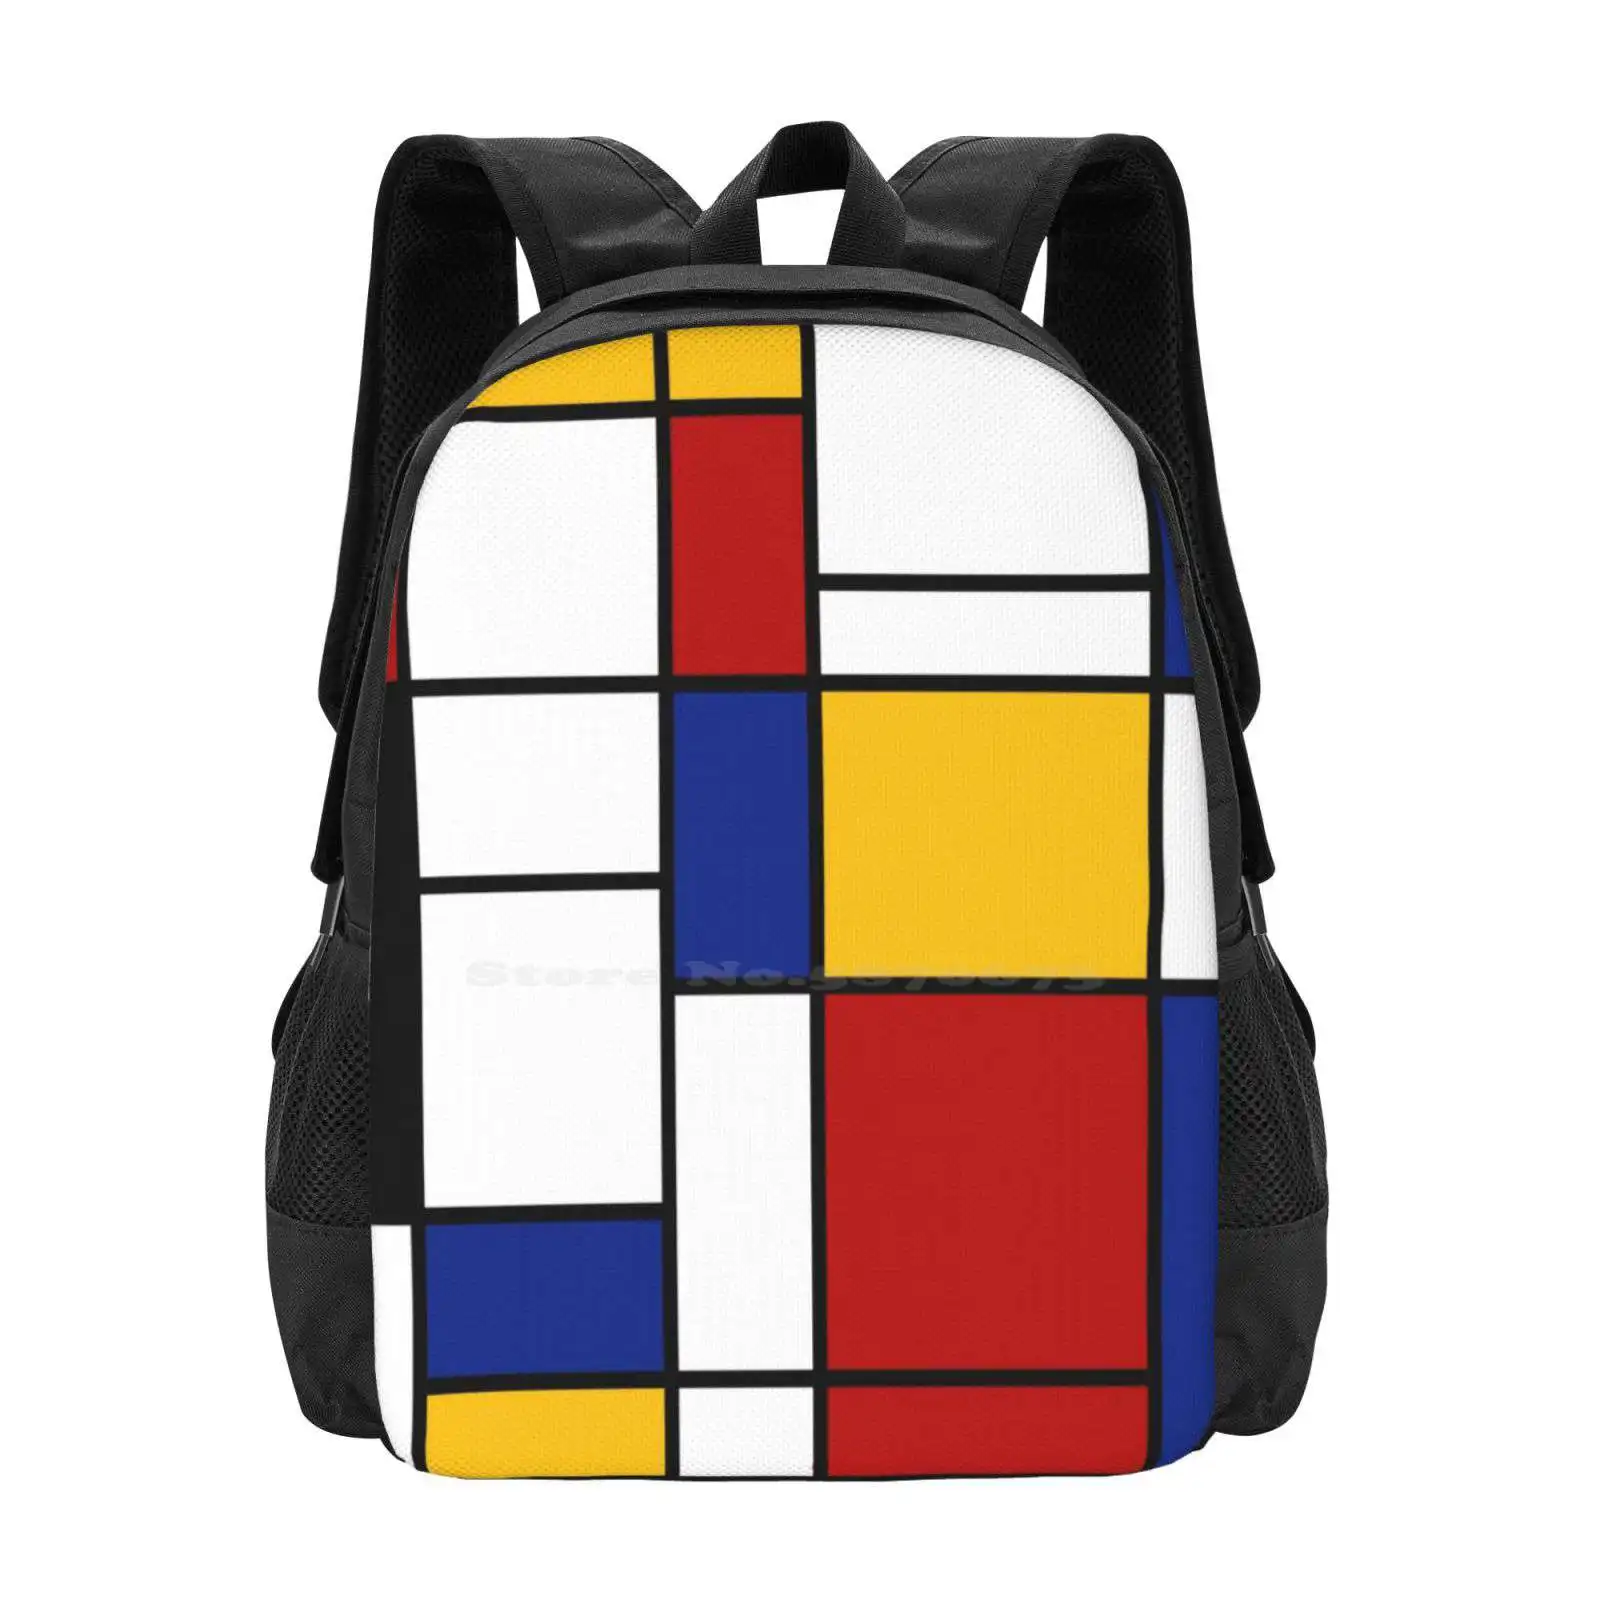 

De Stijl #2 ( Mondrian Inspired ) Hot Sale Backpack Fashion Bags De Stijl Primary Colours Colors Red Yellow Blue Lines The